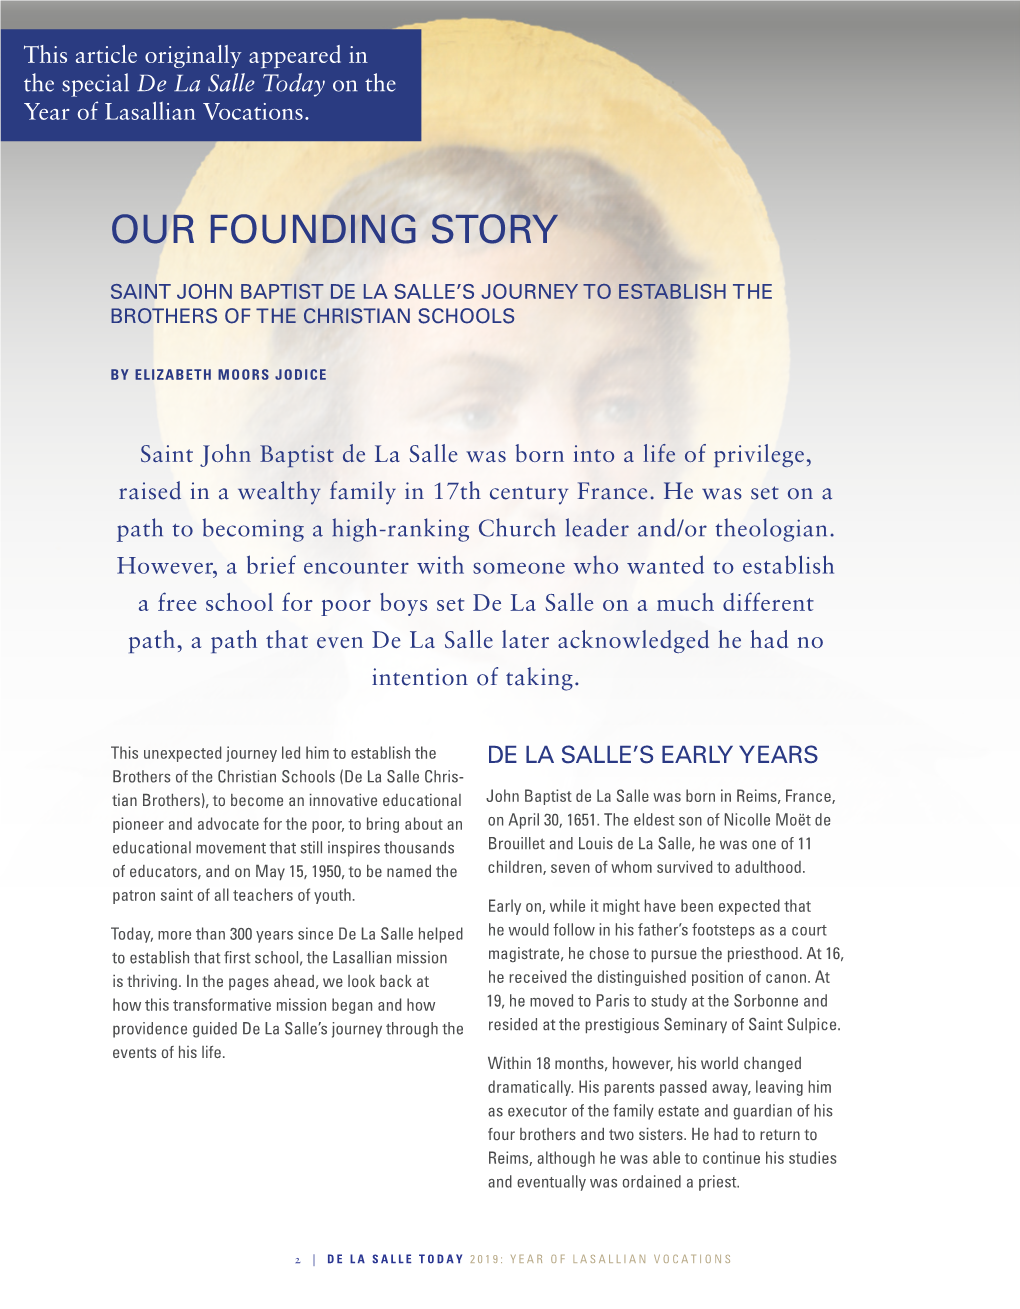 Our Founding Story